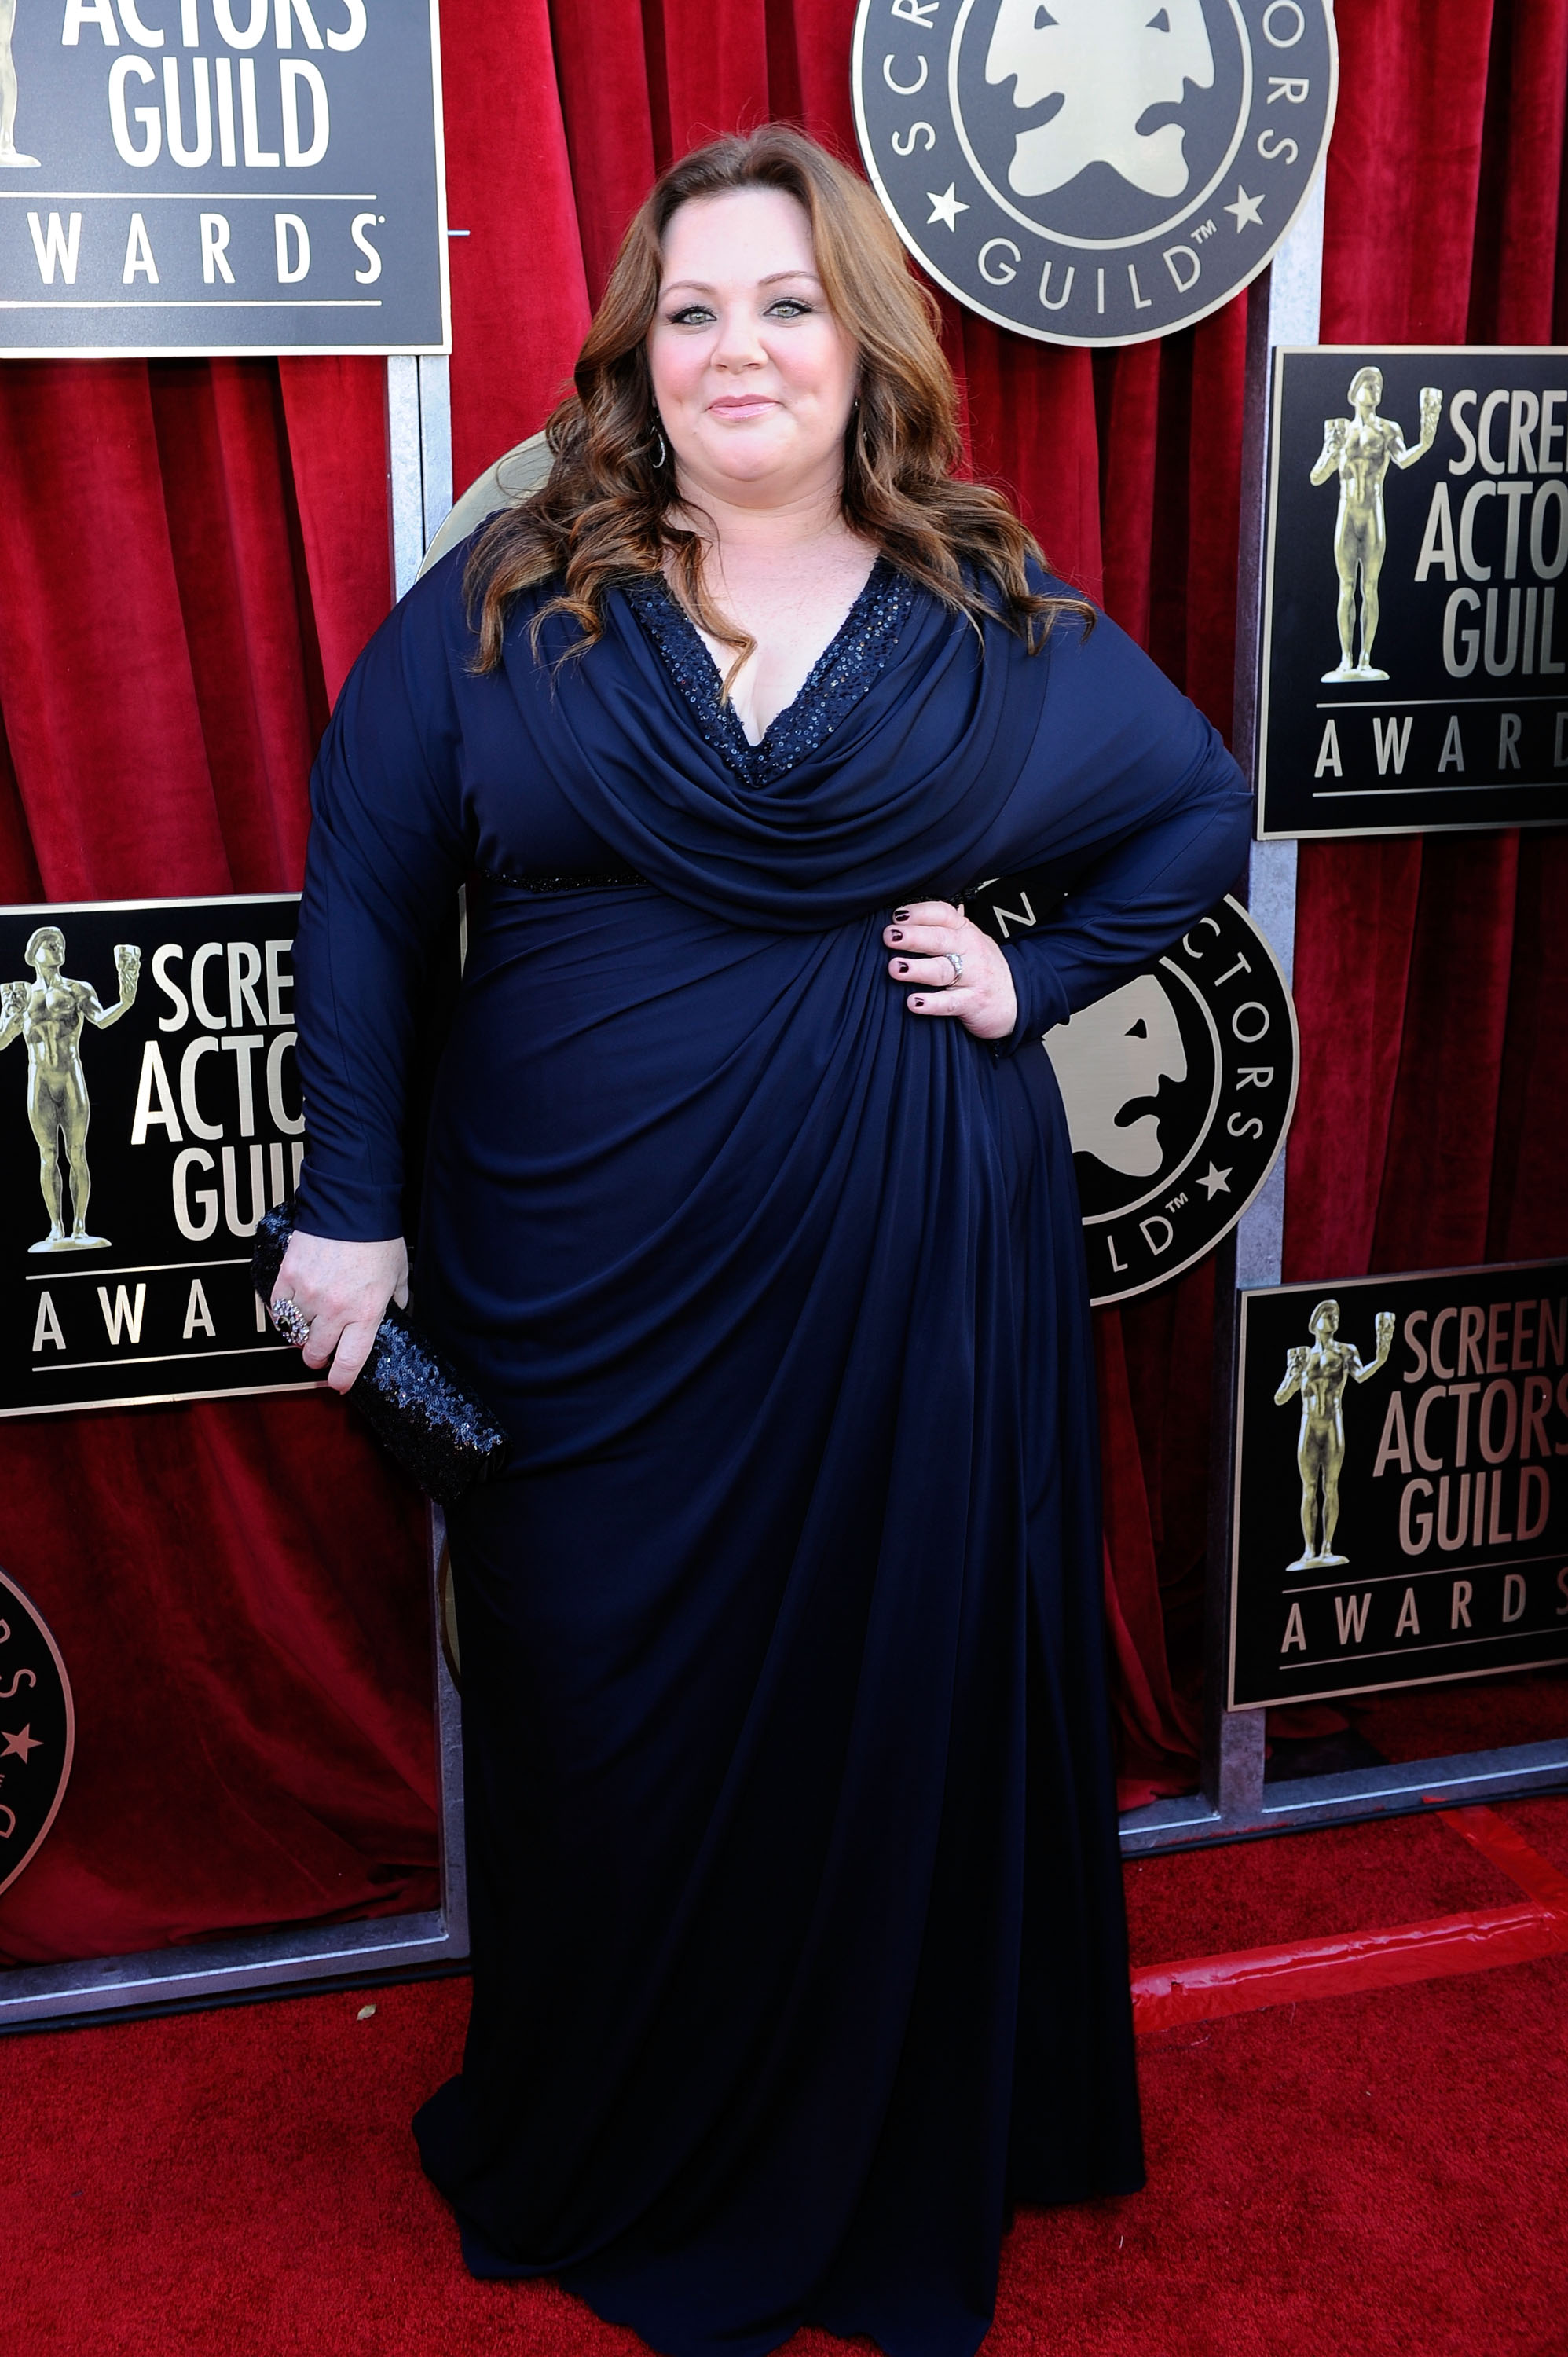 Melissa McCarthy at the 18th Annual Screen Actors Guild Awards in Los Angeles, California on January 29, 2012 | Source: Getty Images